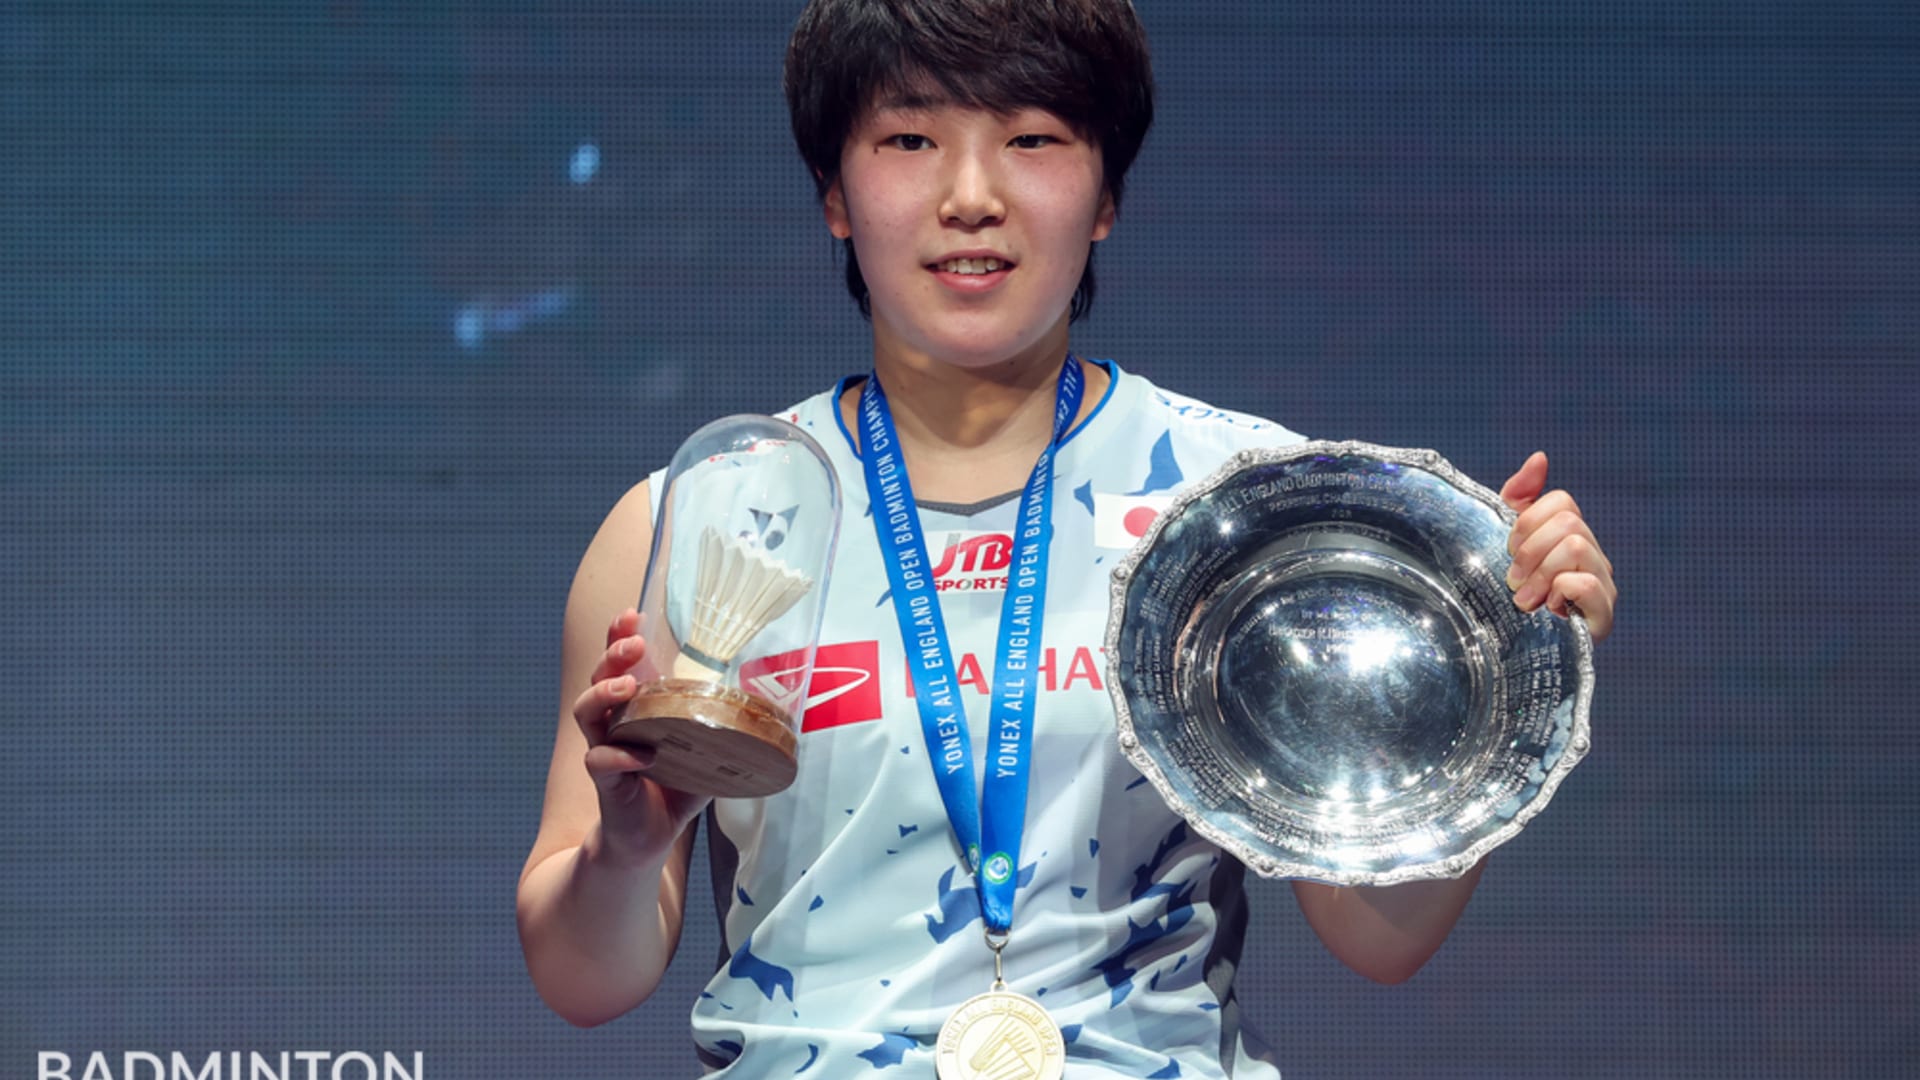 All England Open Badminton Championships 2022 Yamaguchi Akane defeats An Seyoung to claim womens singles title